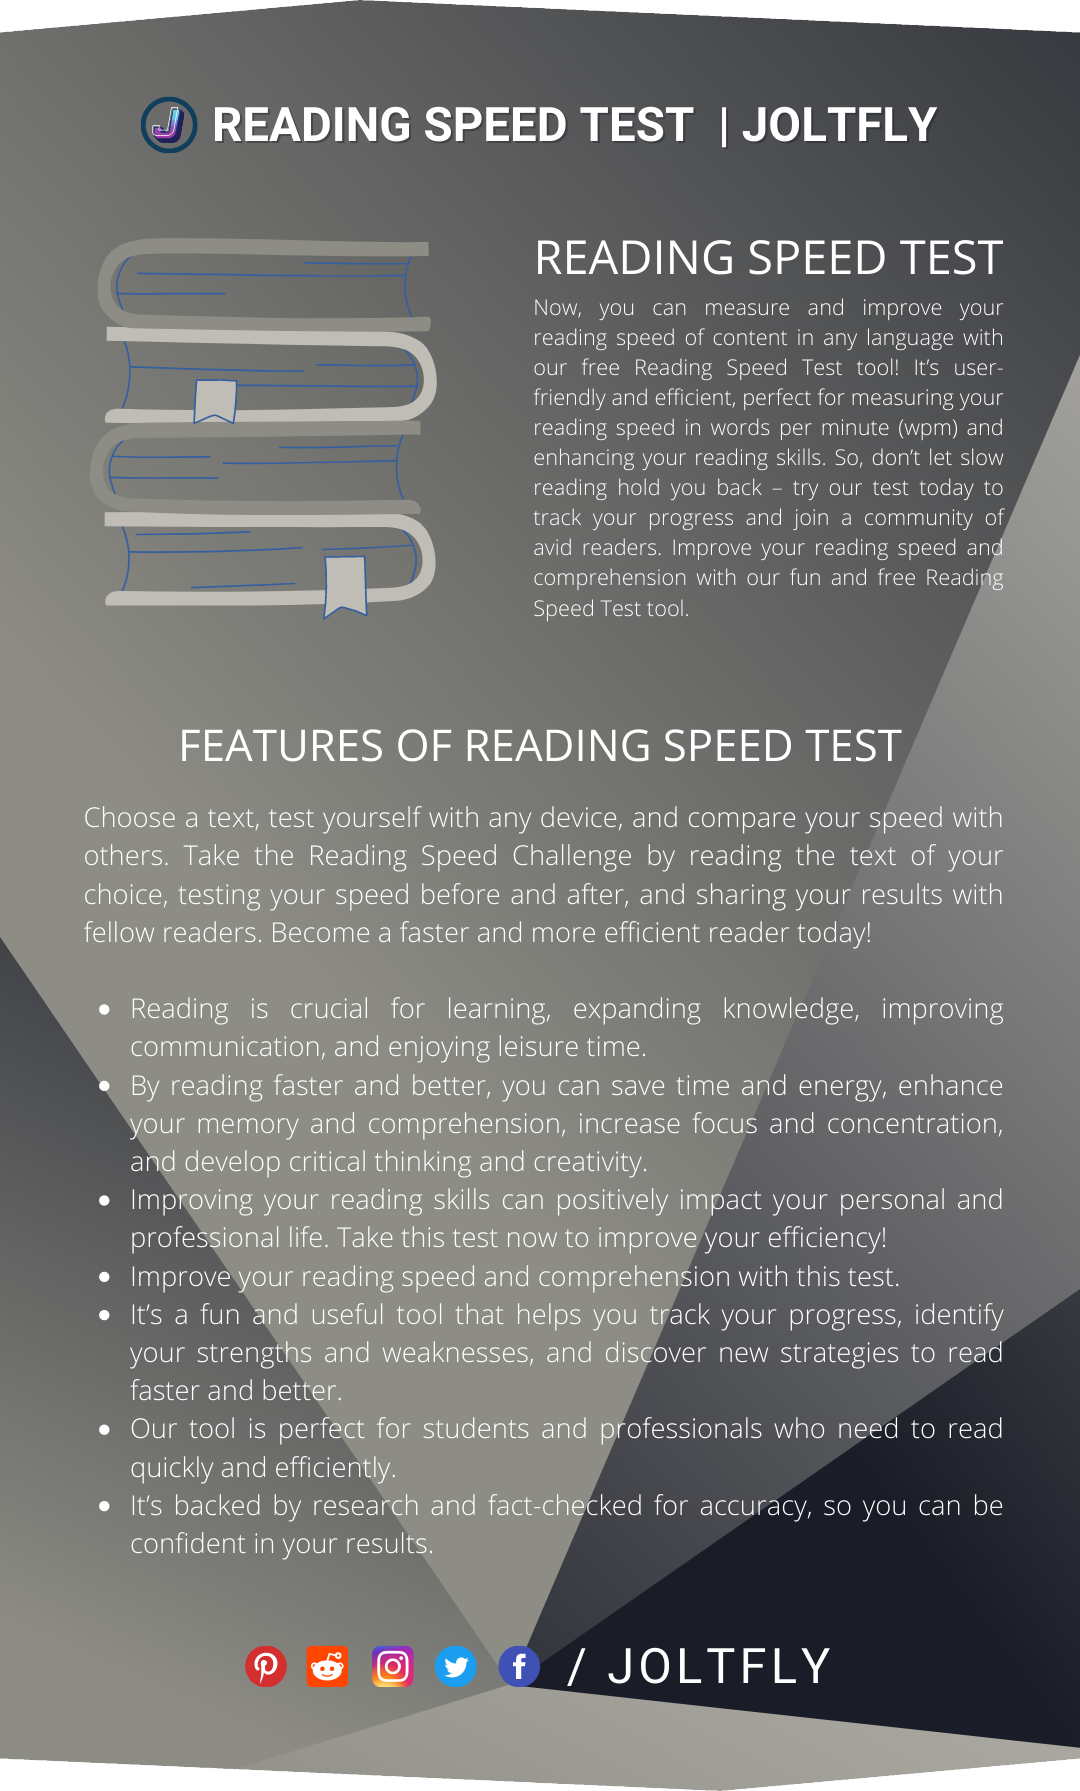 Reading Speed Test-Features